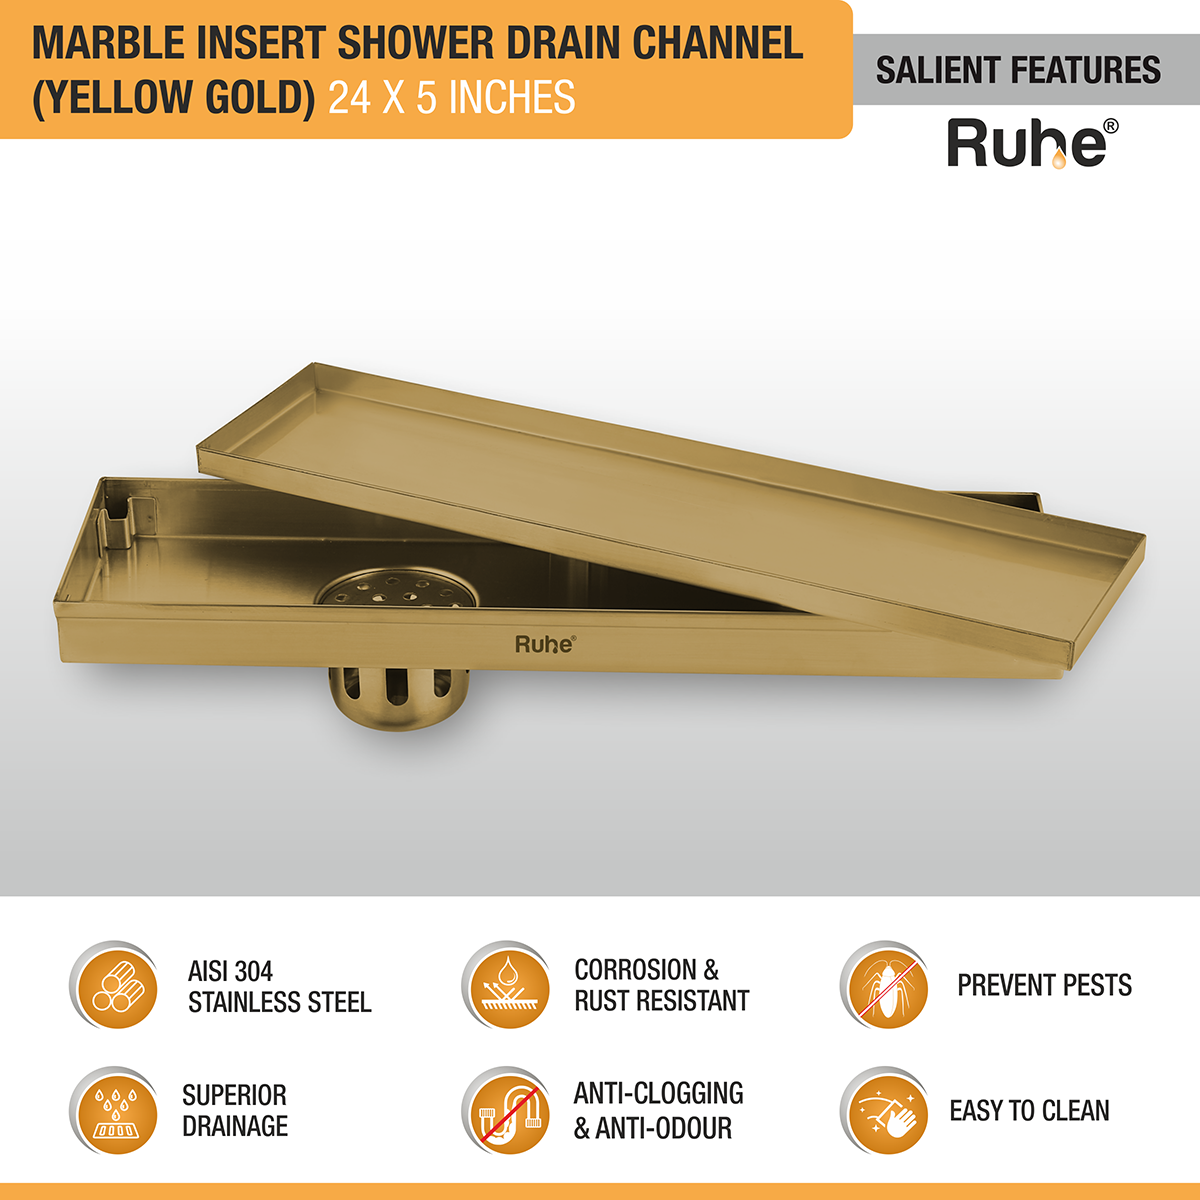 Marble Insert Shower Drain Channel (24 x 5 Inches) YELLOW GOLD PVD Coated features and benefits